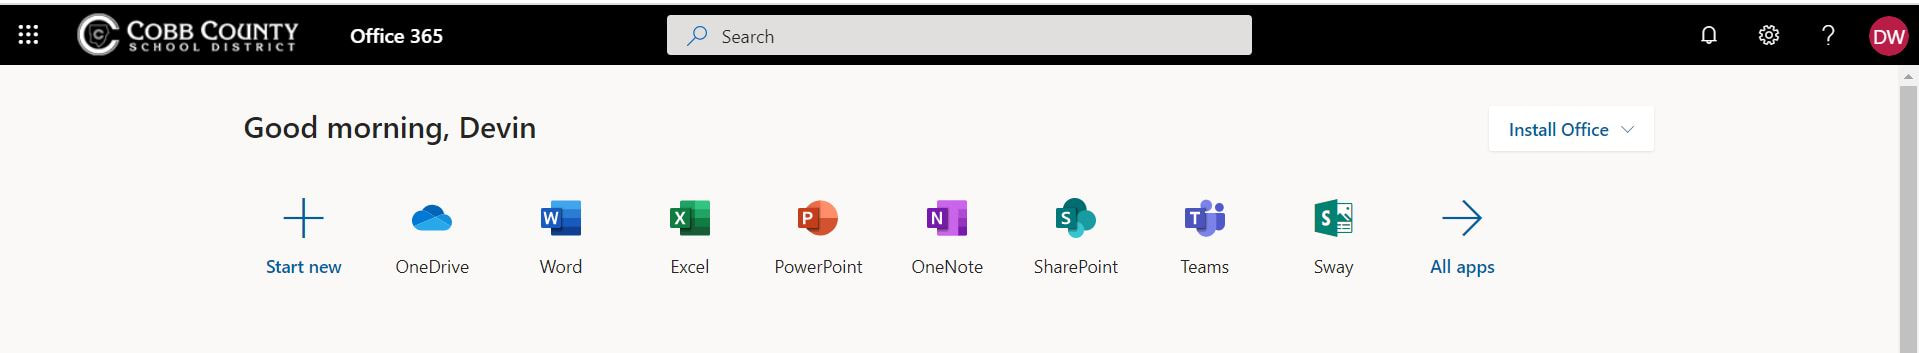 office 365 action center